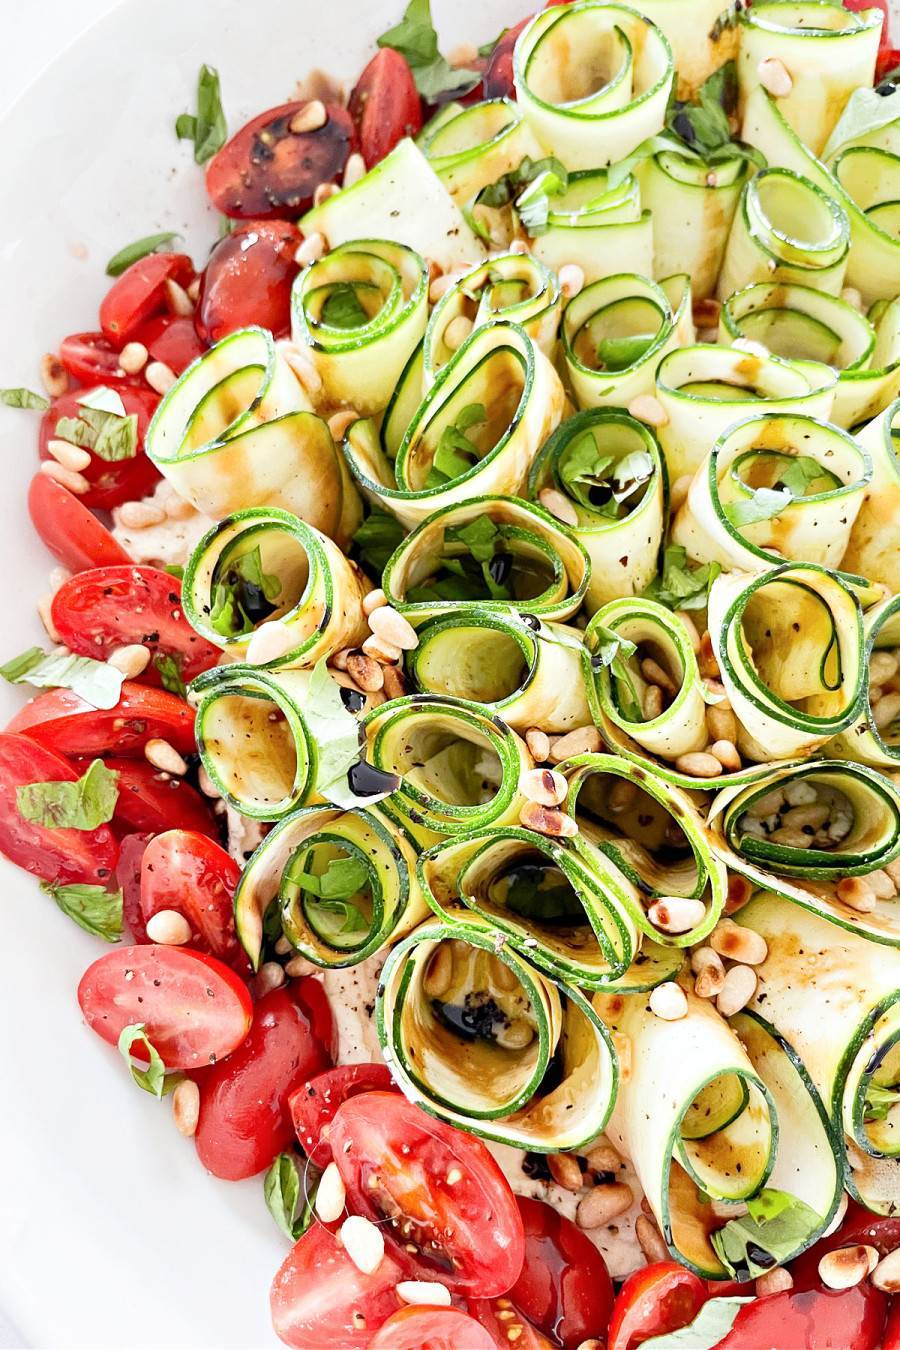 Rolled Zucchini Salad With Balsamic Dressing